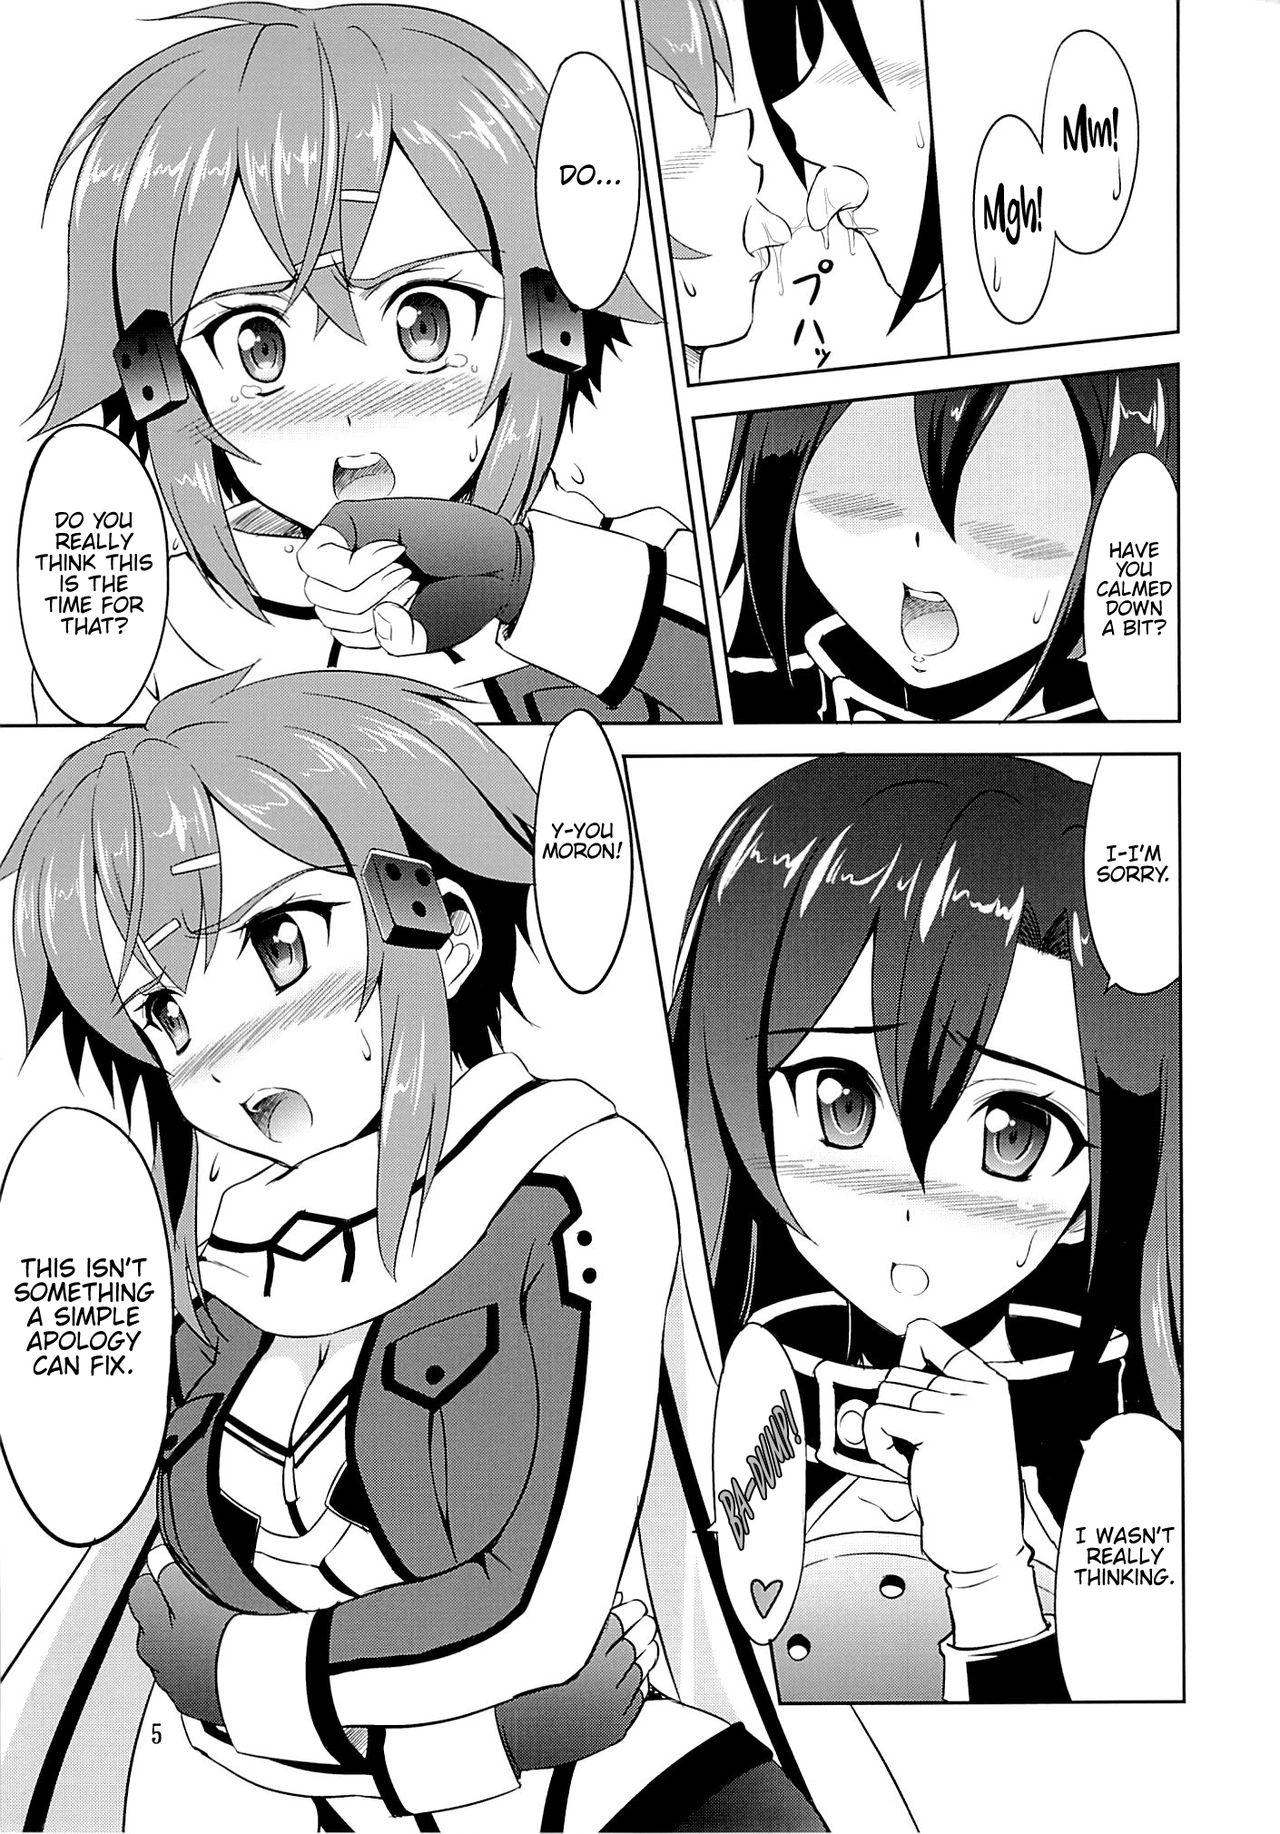 Squirting Gyakushuu no Shinon - Sword art online Best Blow Jobs Ever - Page 4